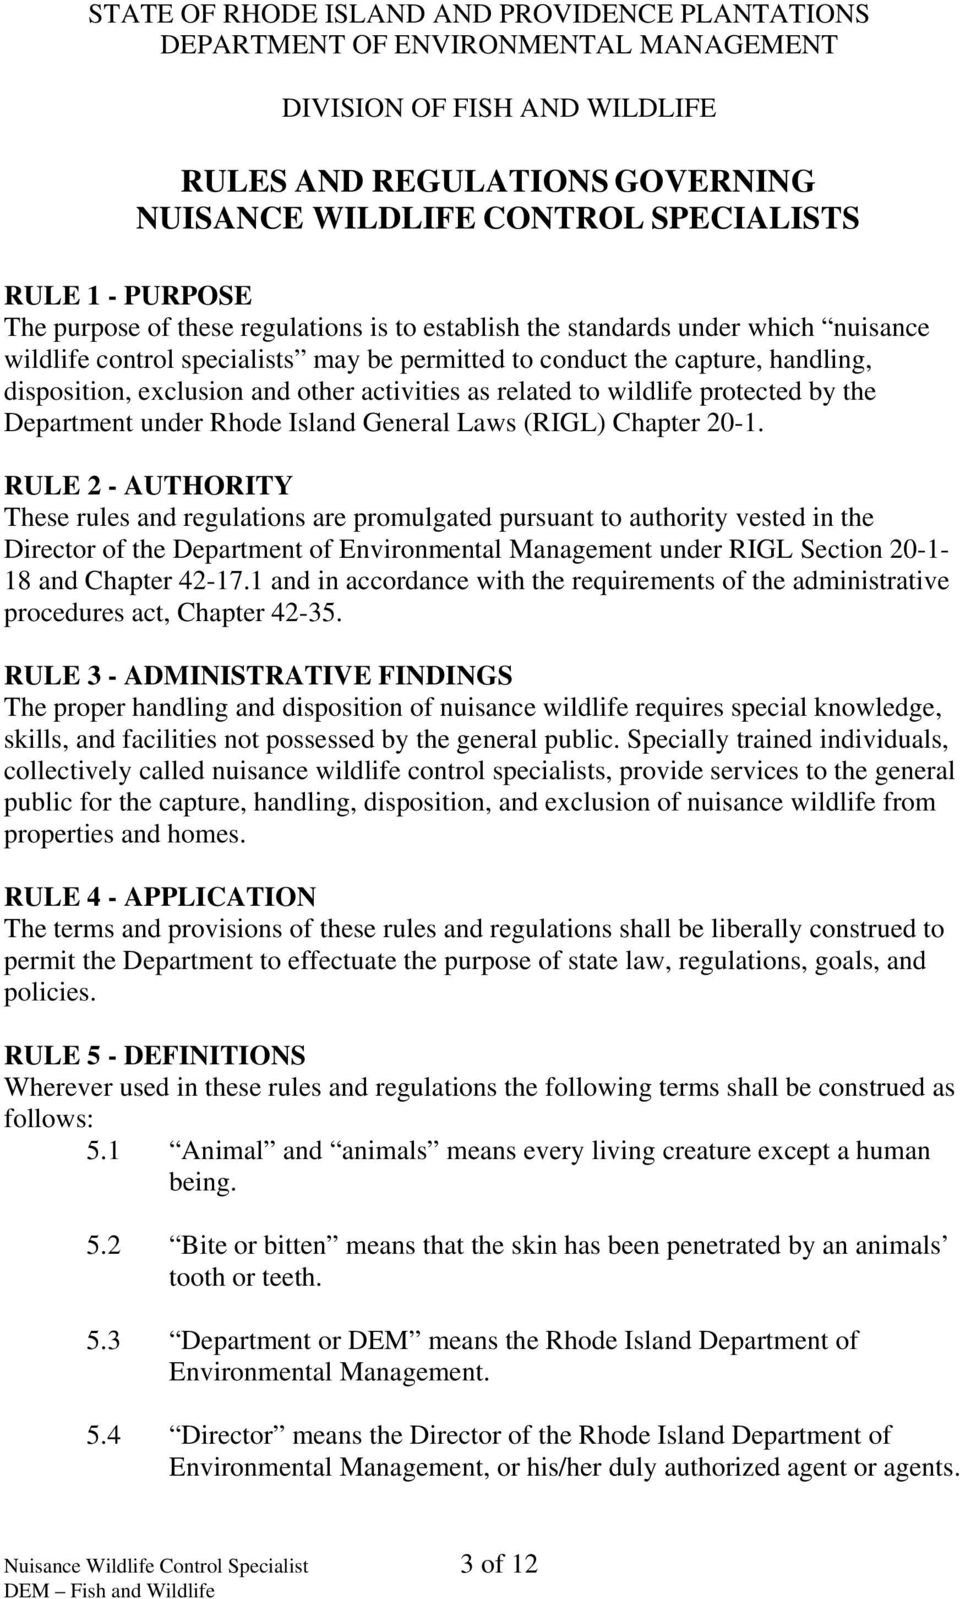 other activities as related to wildlife protected by the Department under Rhode Island General Laws (RIGL) Chapter 20-1.